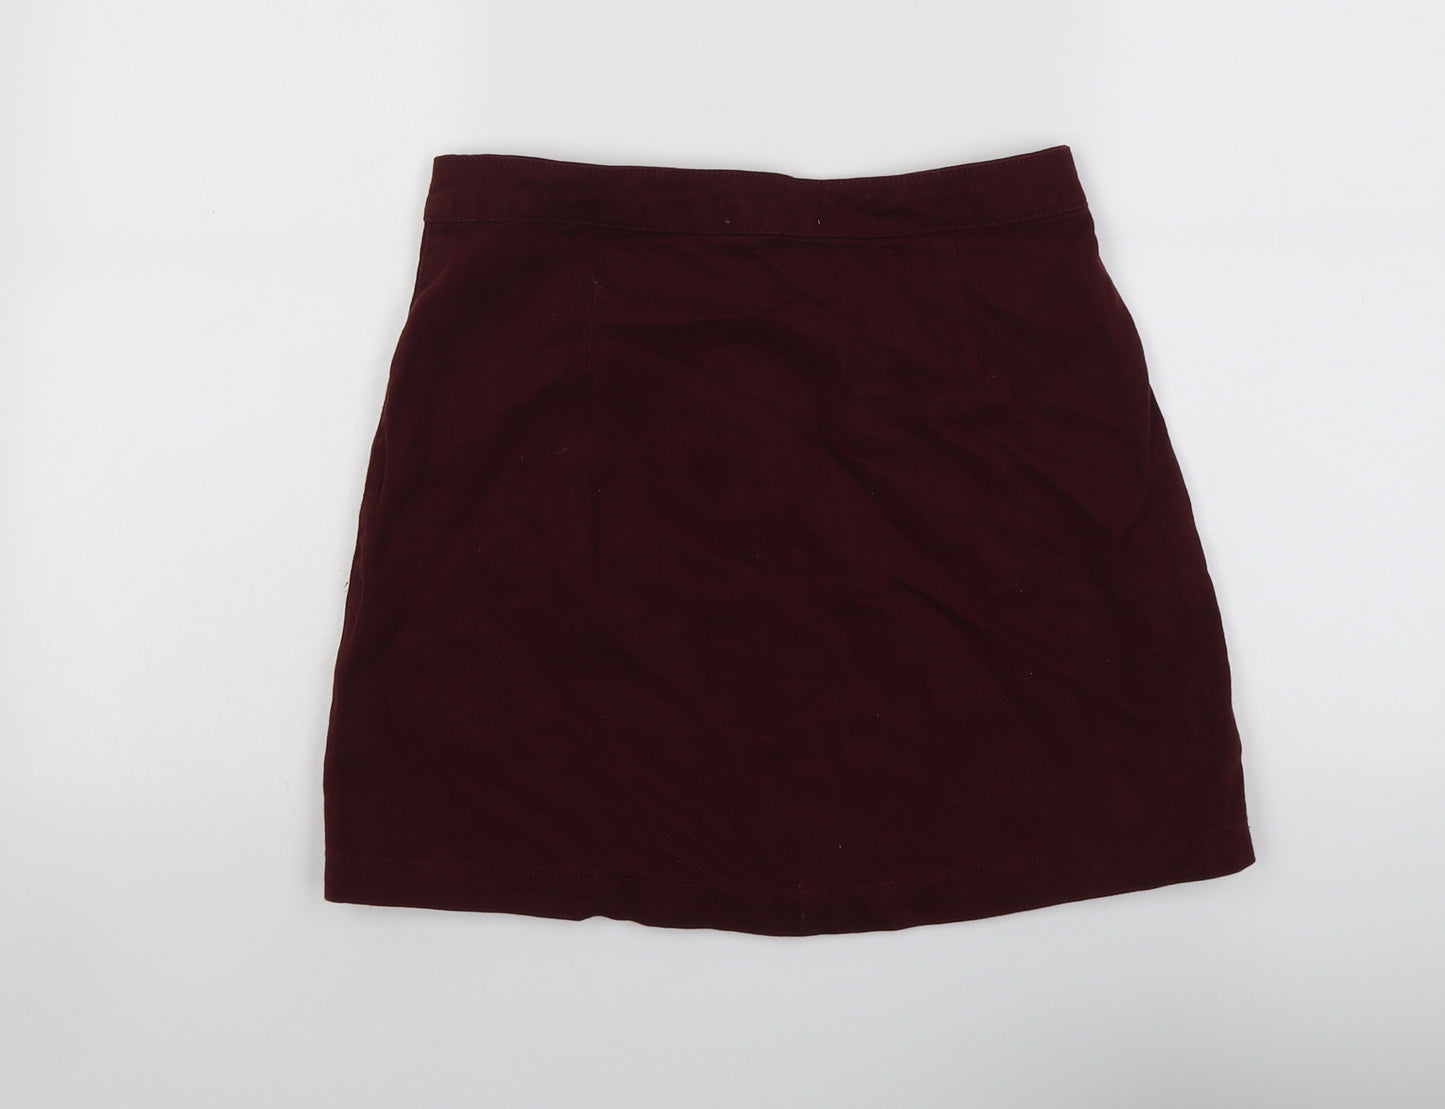 New Look Womens Red Cotton A-Line Skirt Size 10 Button